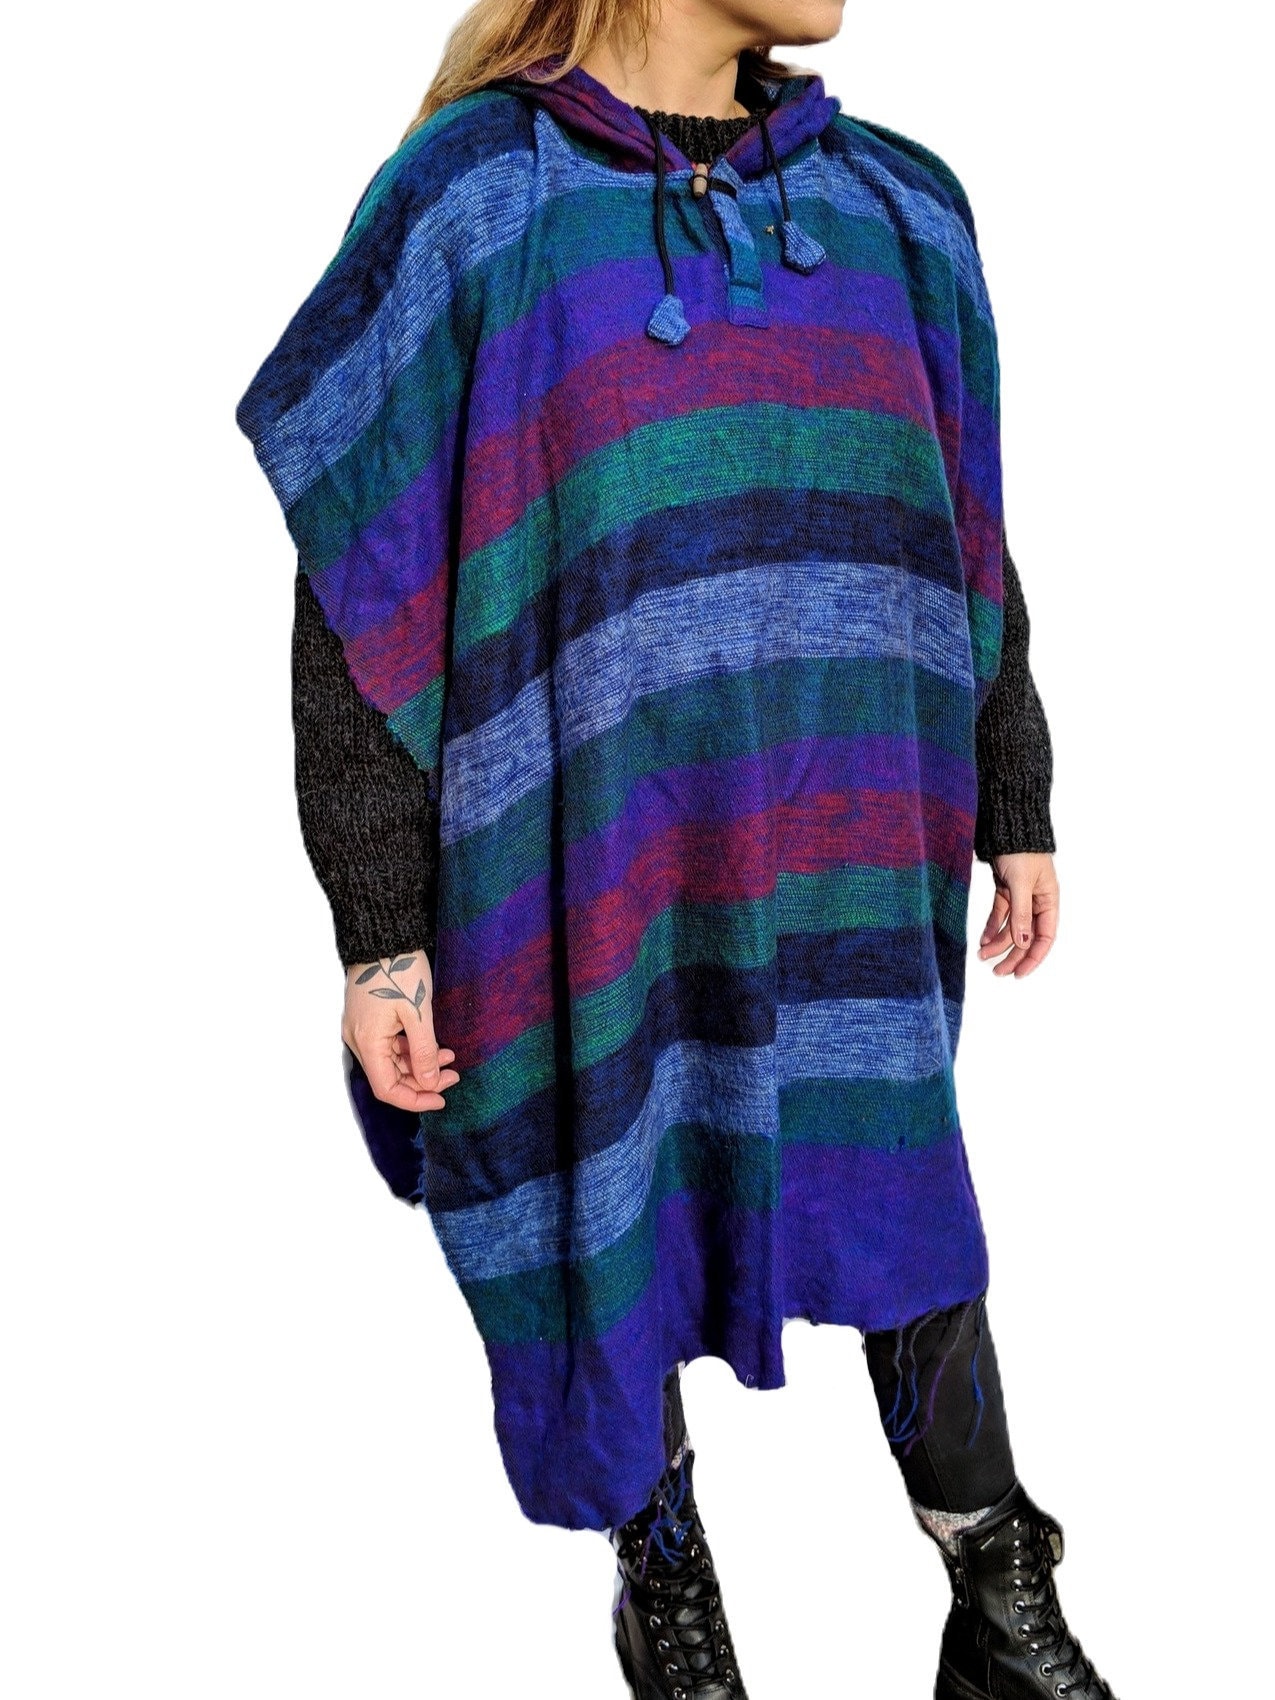 Åben Beskrivende Lagring Fairtrade Unisex Striped Poncho With Hood in 5 Colours - Etsy